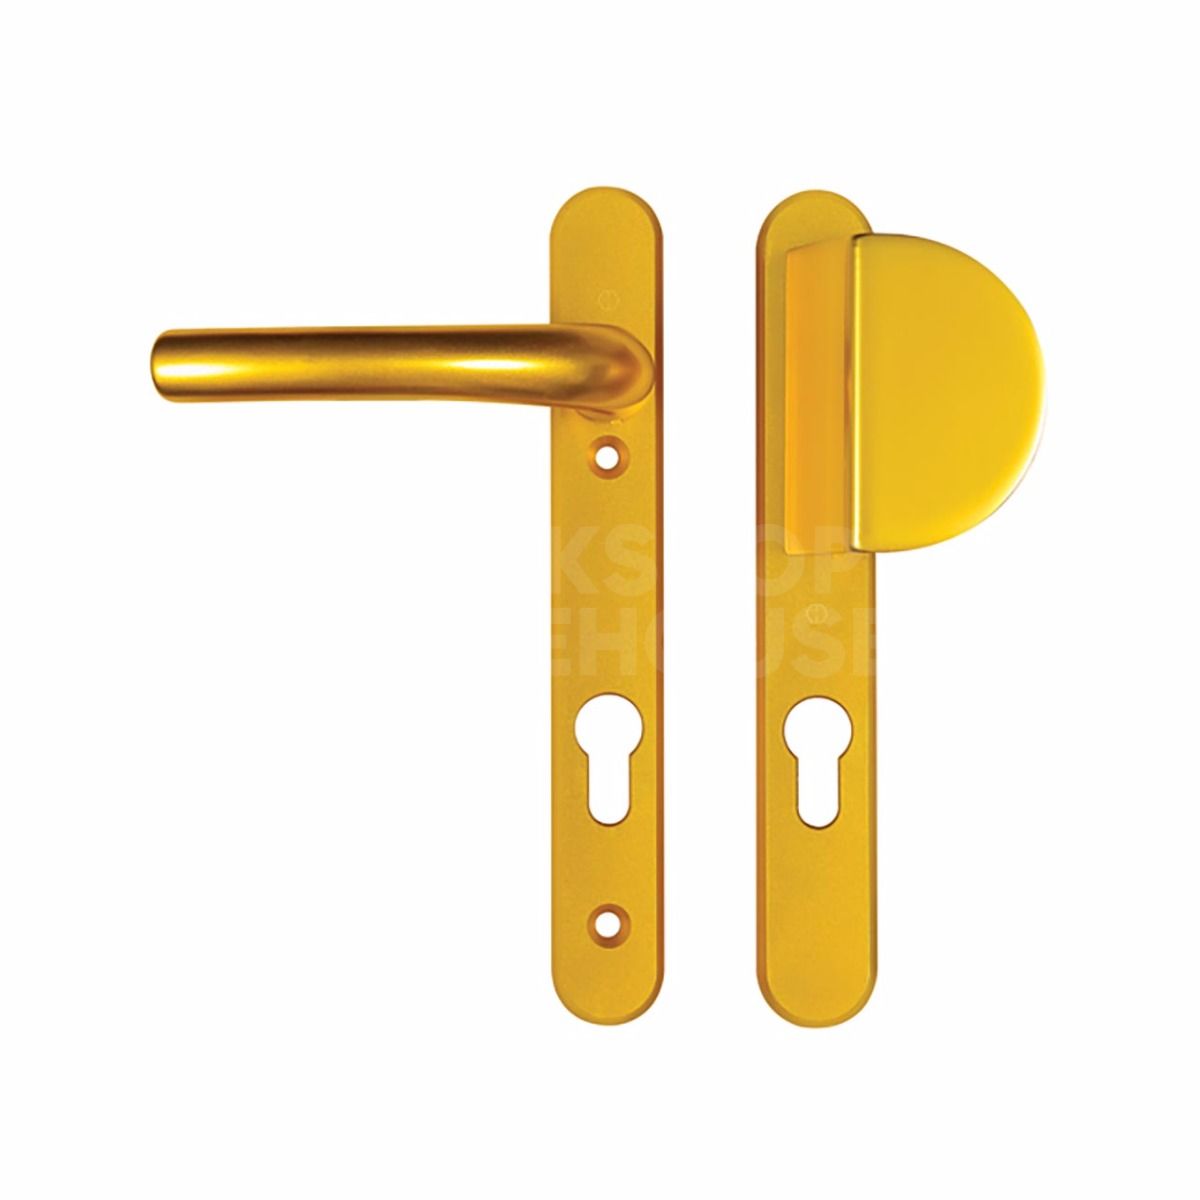 Hoppe UPVC Lever - Fixed Pad handles 92mm centres